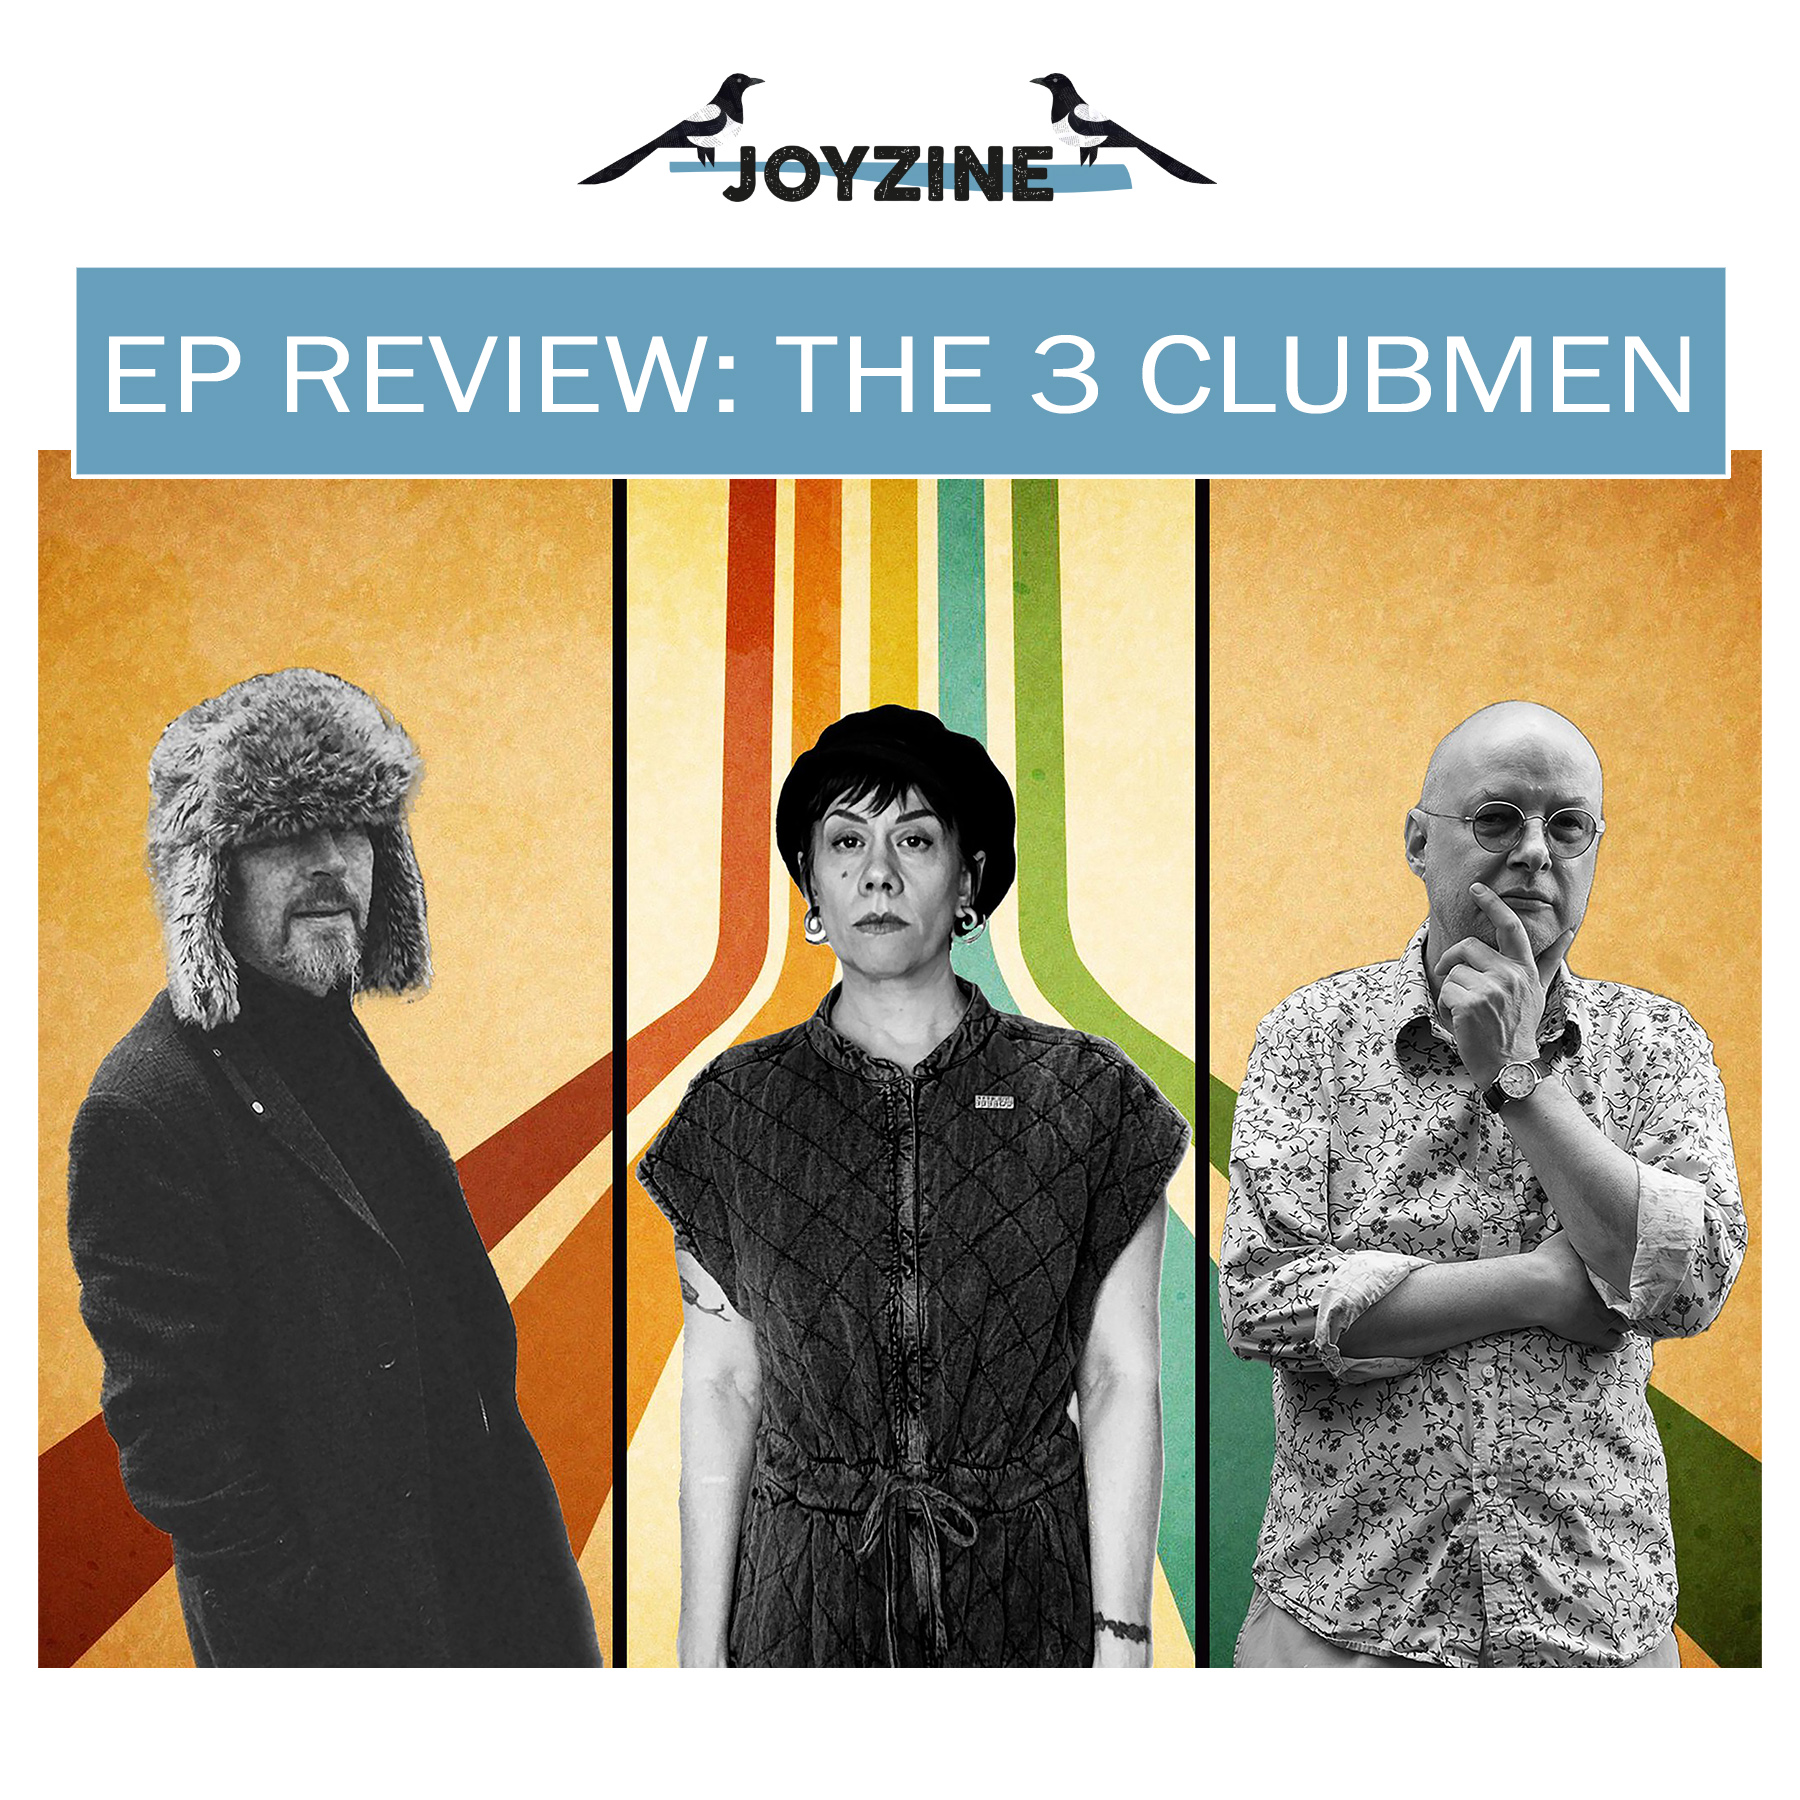 EP REVIEW - THE 3 CLUBMEN